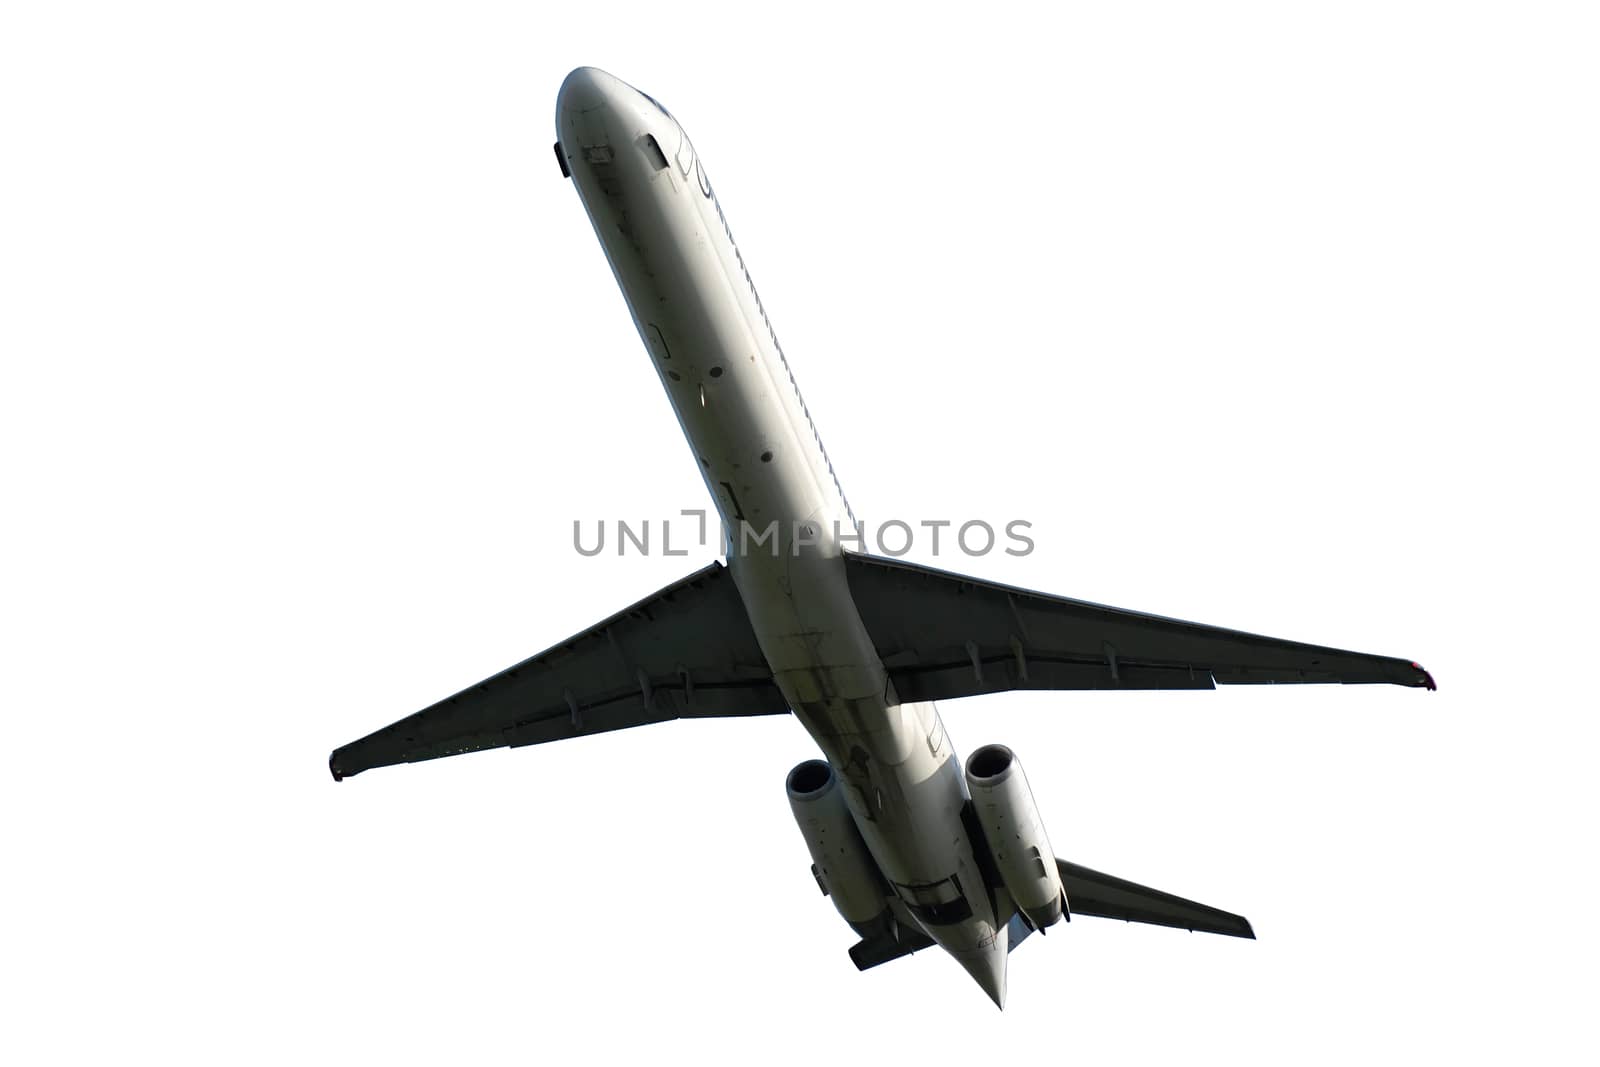 Plane isolated on a white background by cfoto